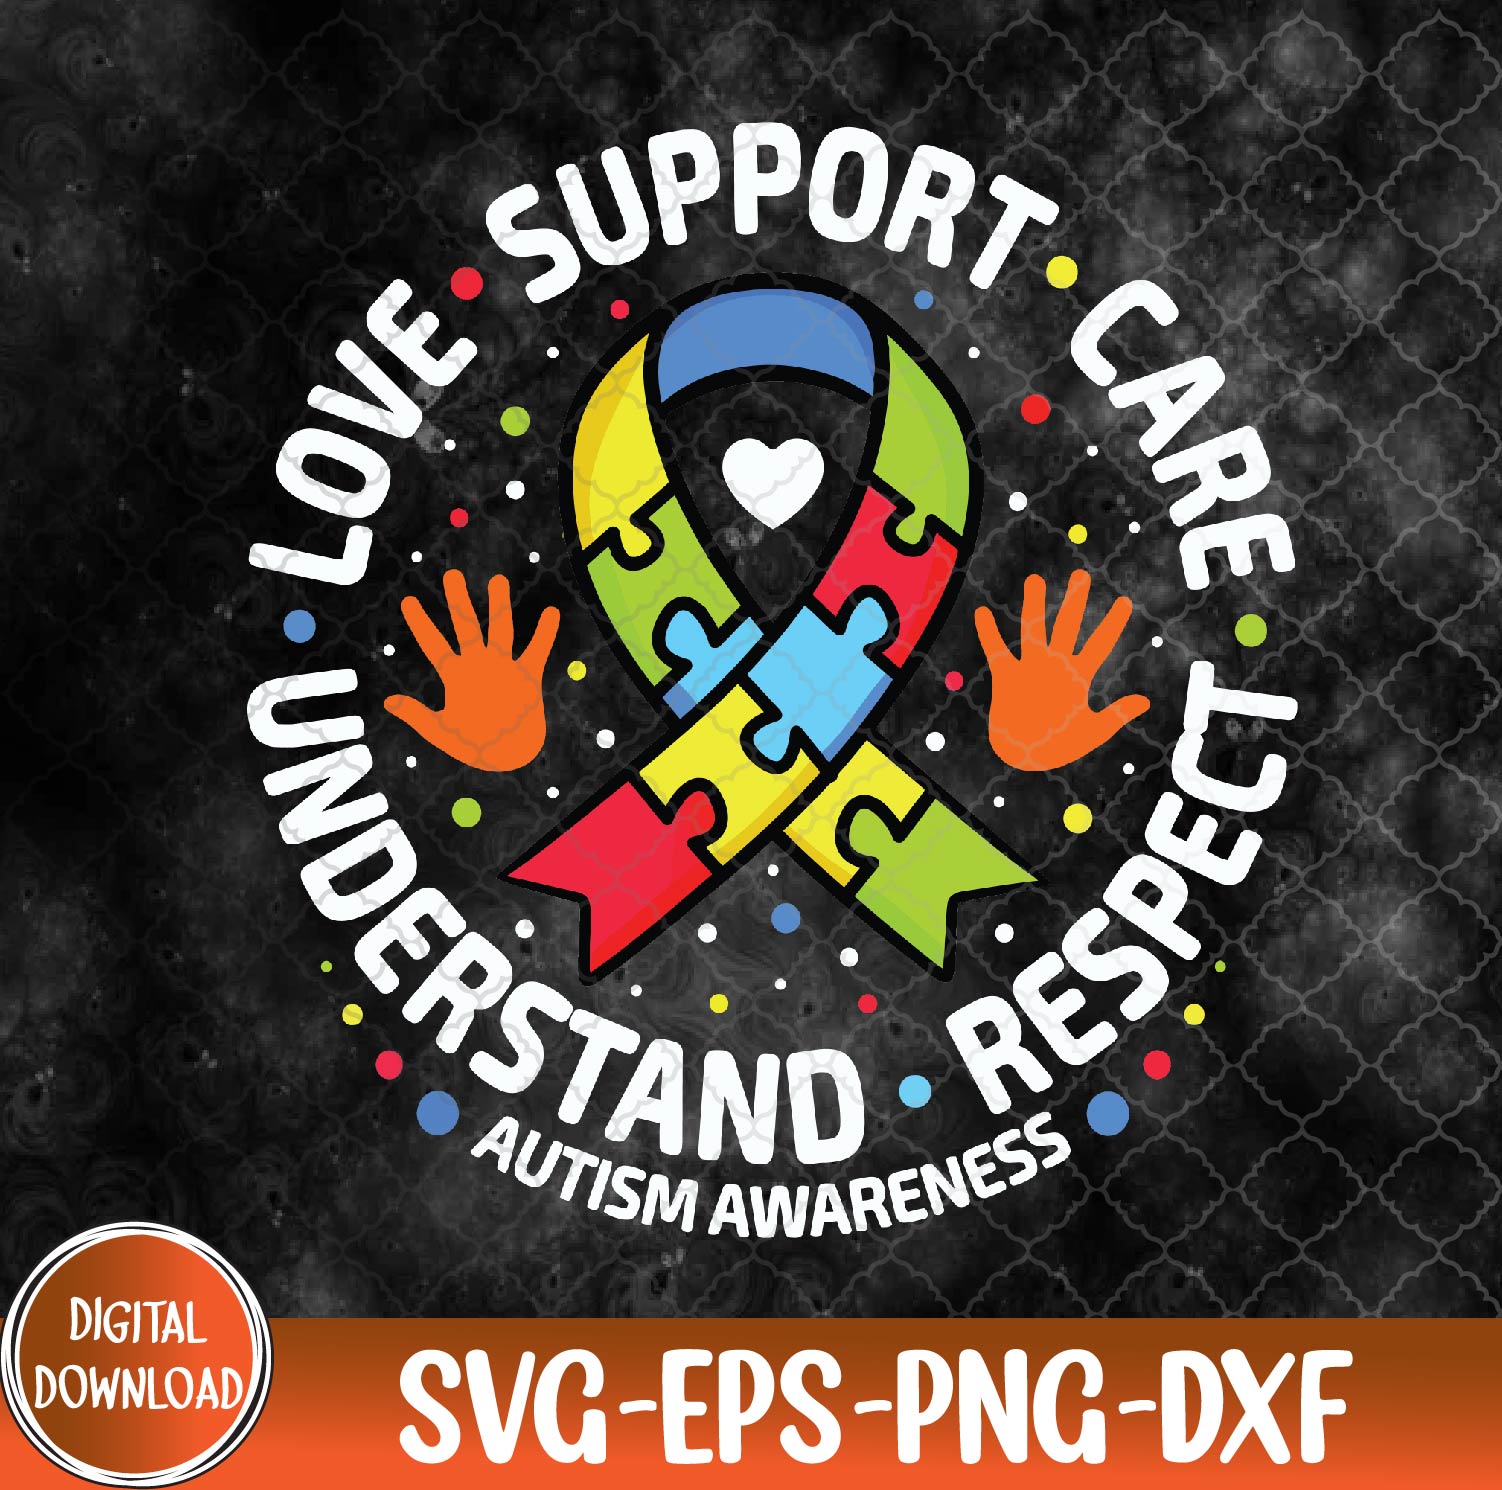 WTMNEW9file 09 27 Autism Awareness Svg, Eps, Png, Dxf